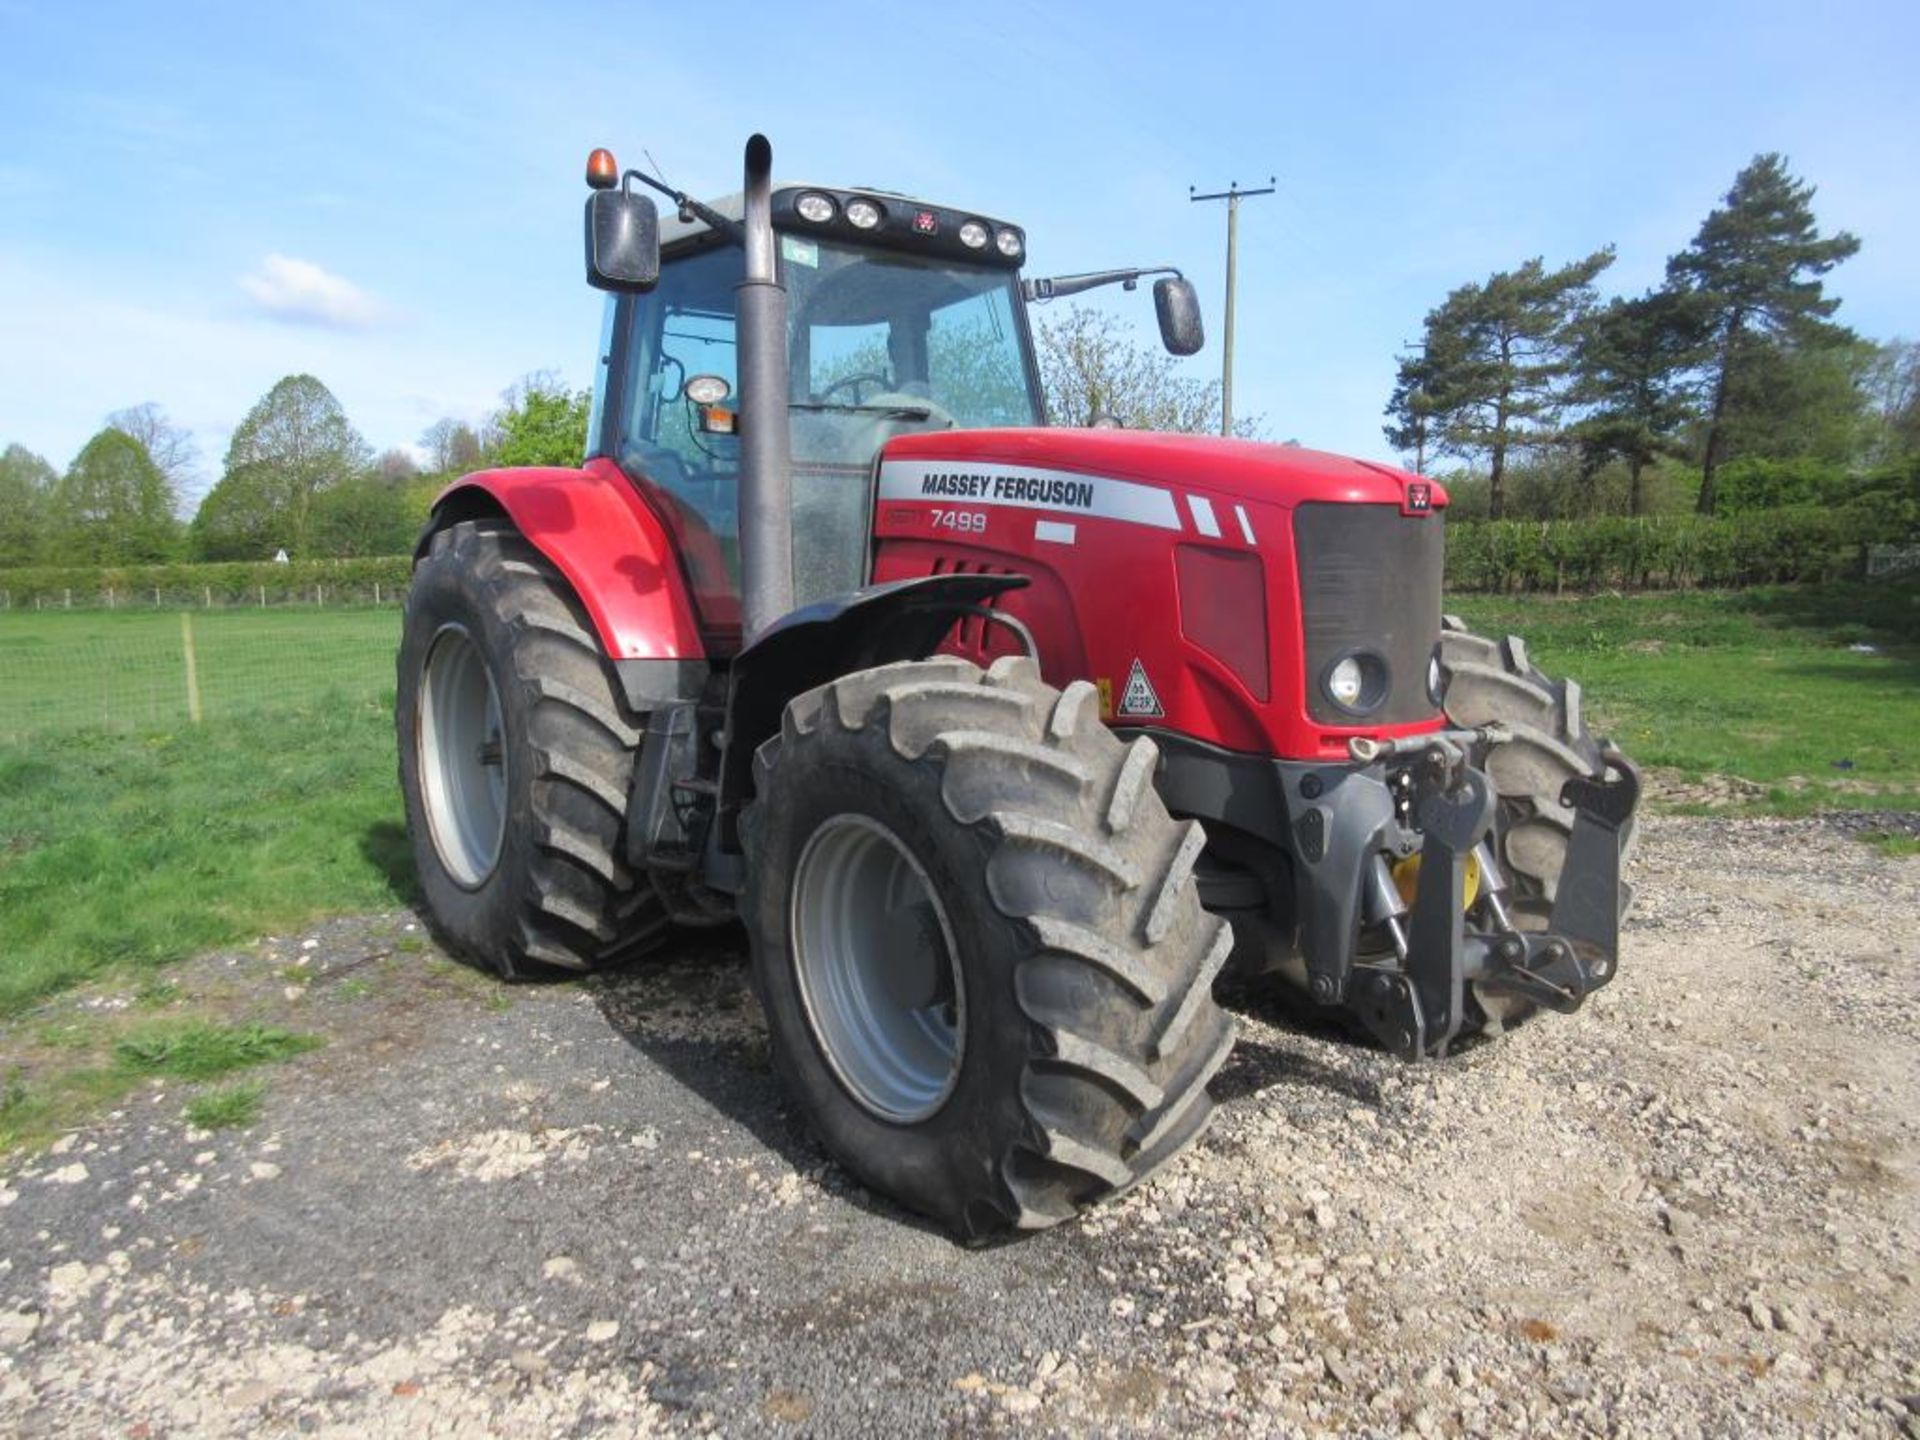 2010 MASSEY FERGUSON 7499 Dyna VT 4wd 50kph TRACTOR Fitted with front linkage and PTO, front and cab - Image 2 of 7